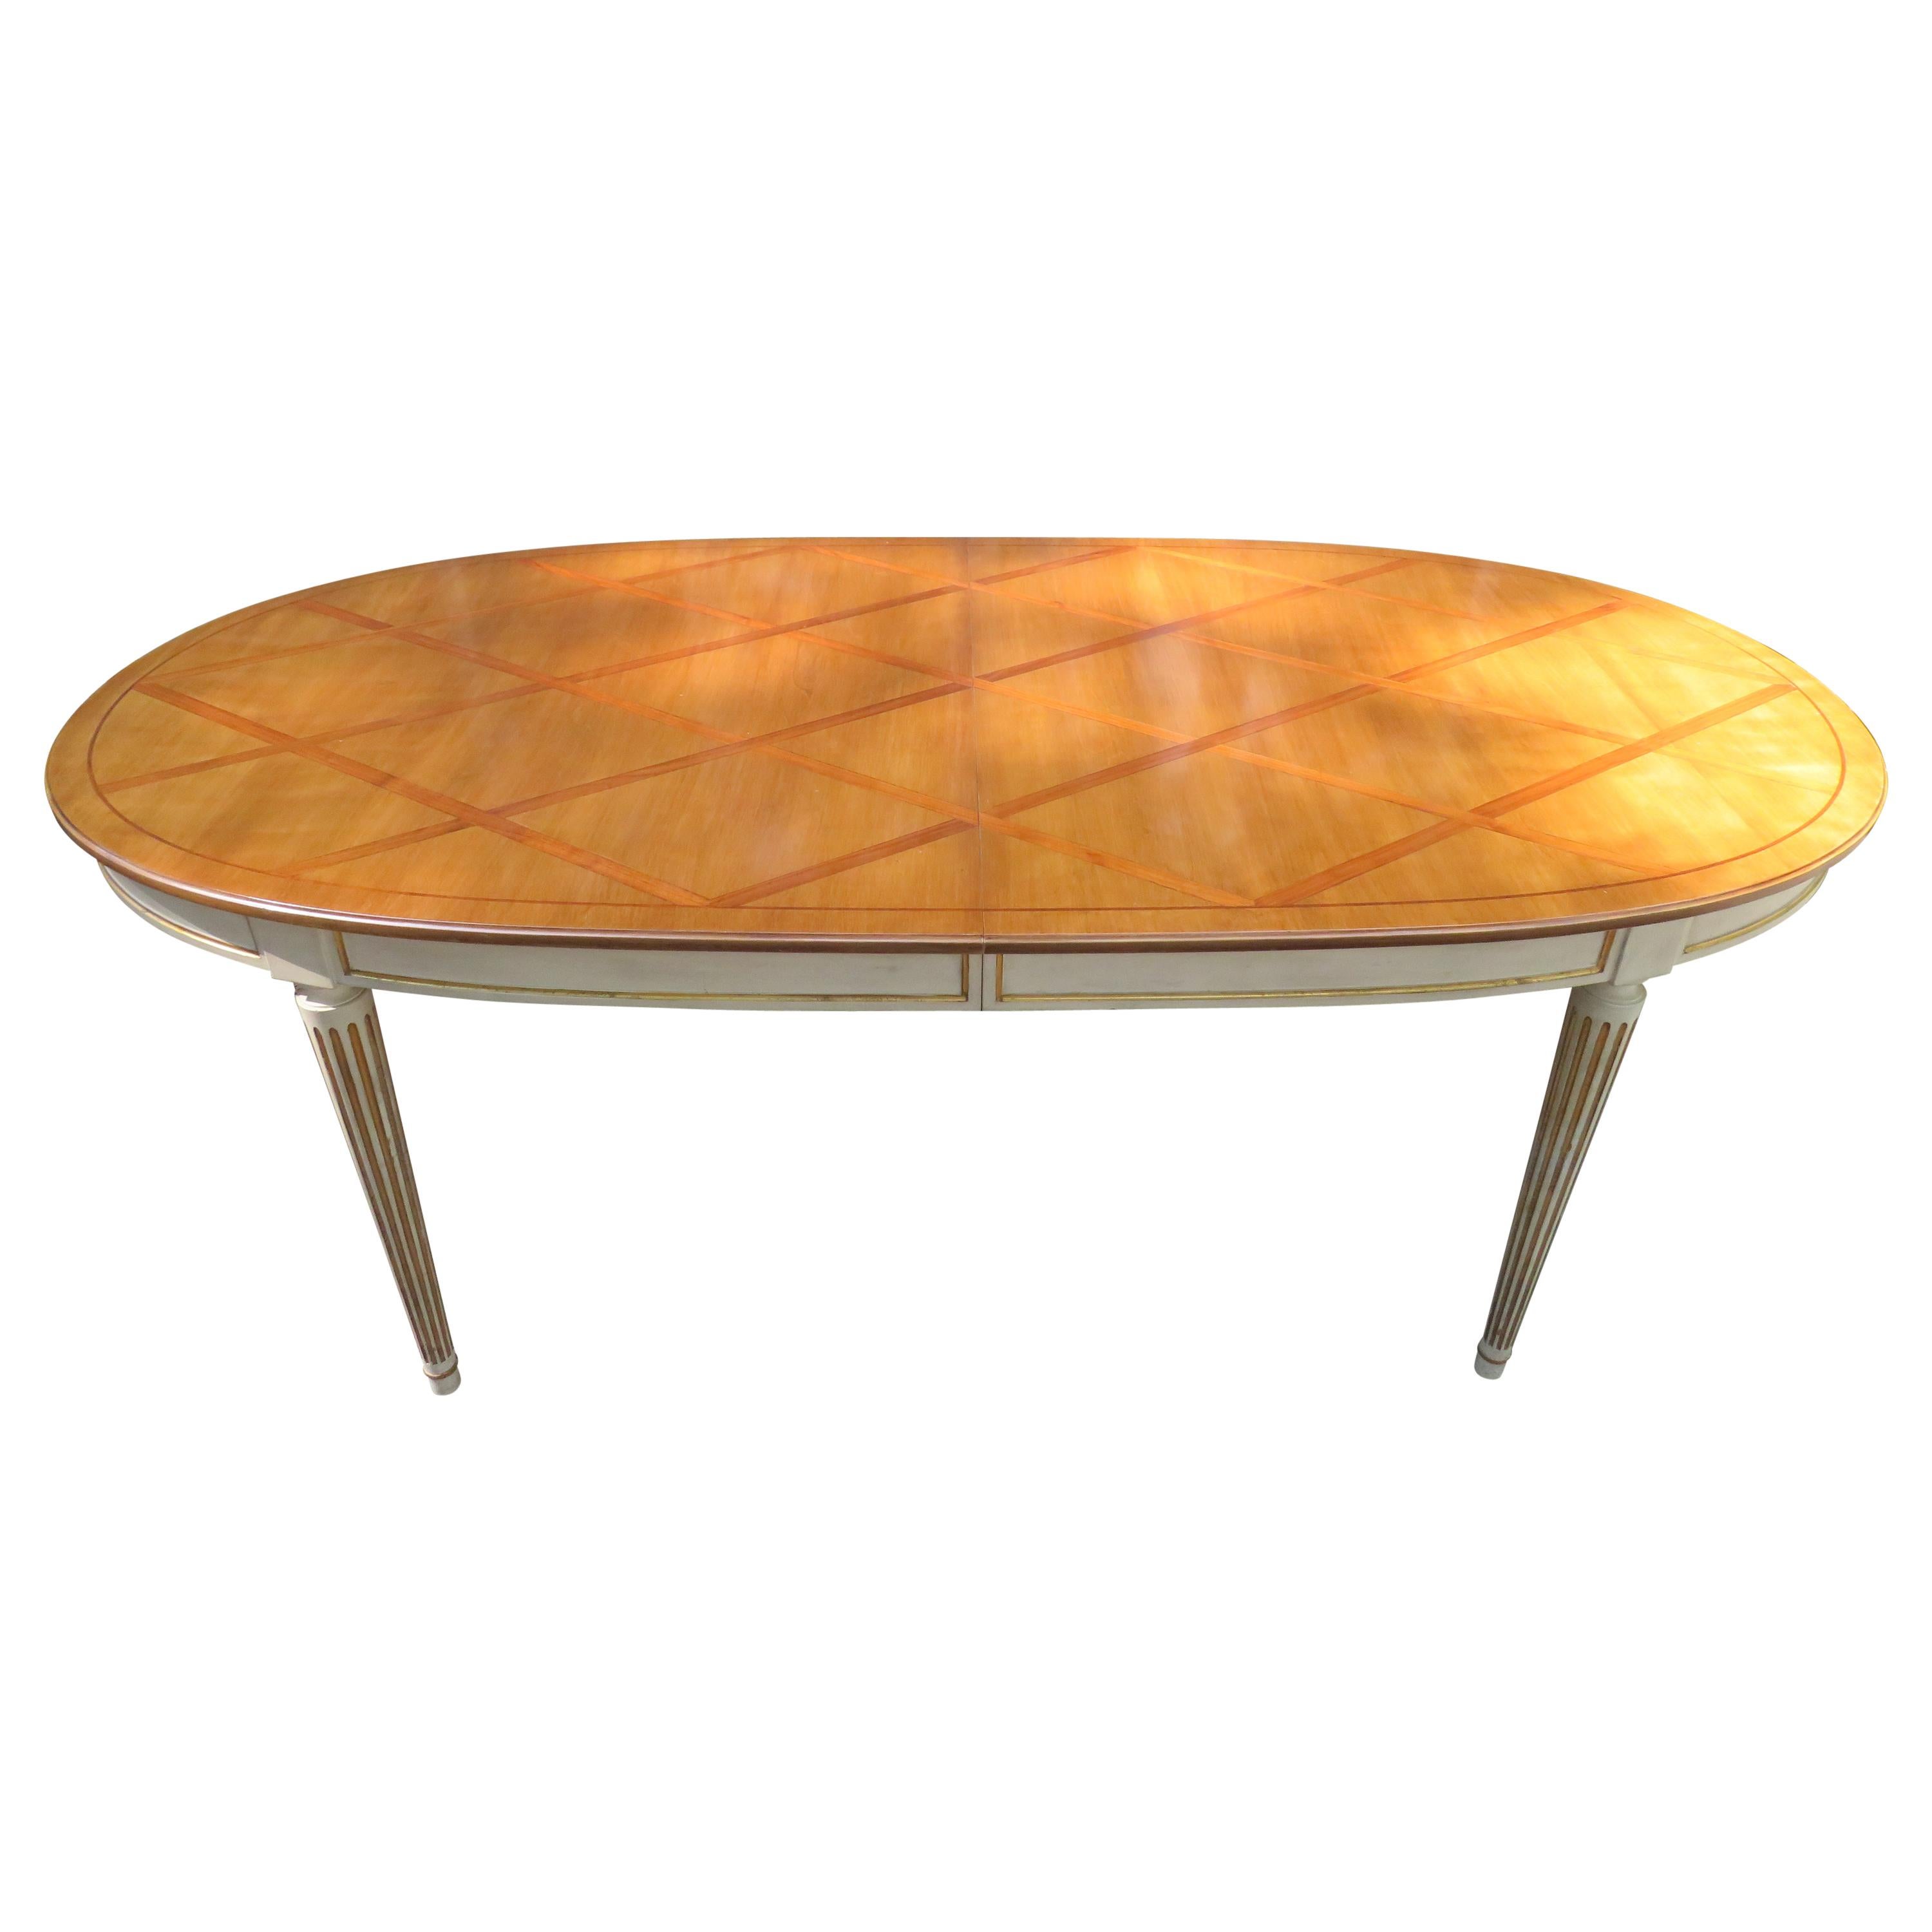 Stunning In-Laid Lattice Top Racetrack Dining Table Hollywood Regency